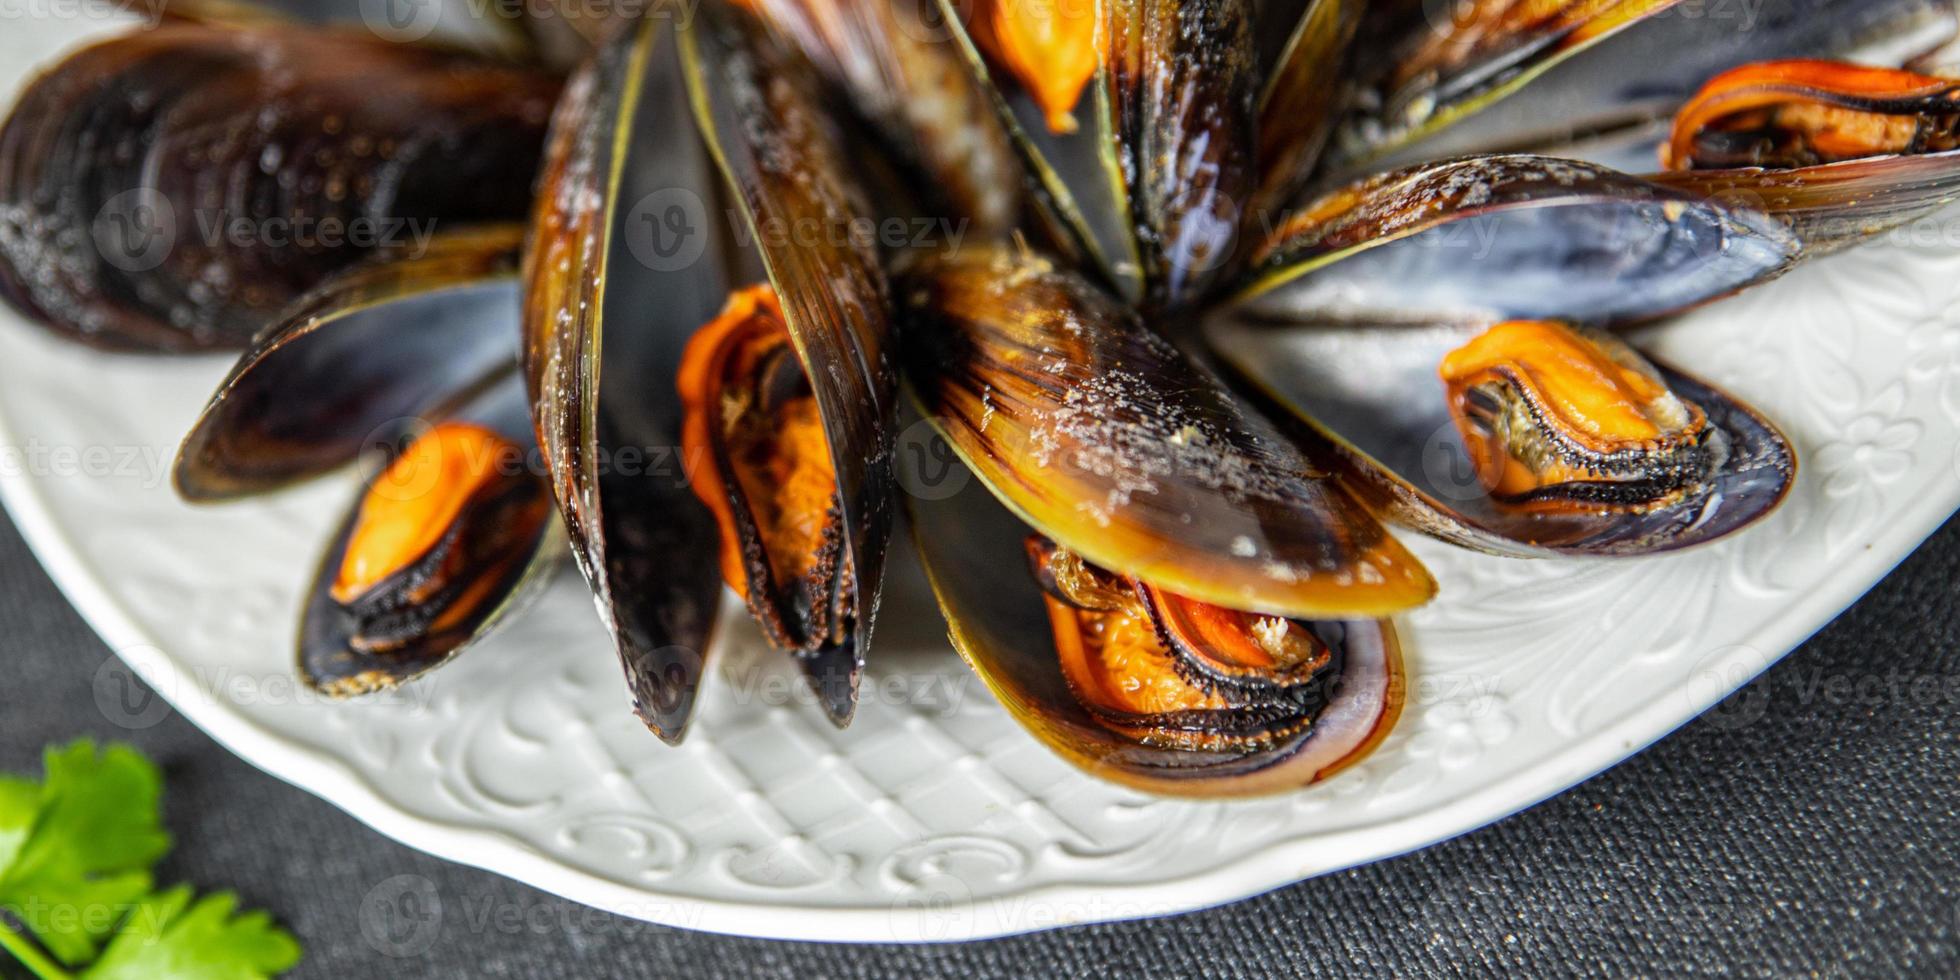 mussels in shells fresh healthy meal food snack diet on the table copy space food background rustic top view keto or paleo diet photo